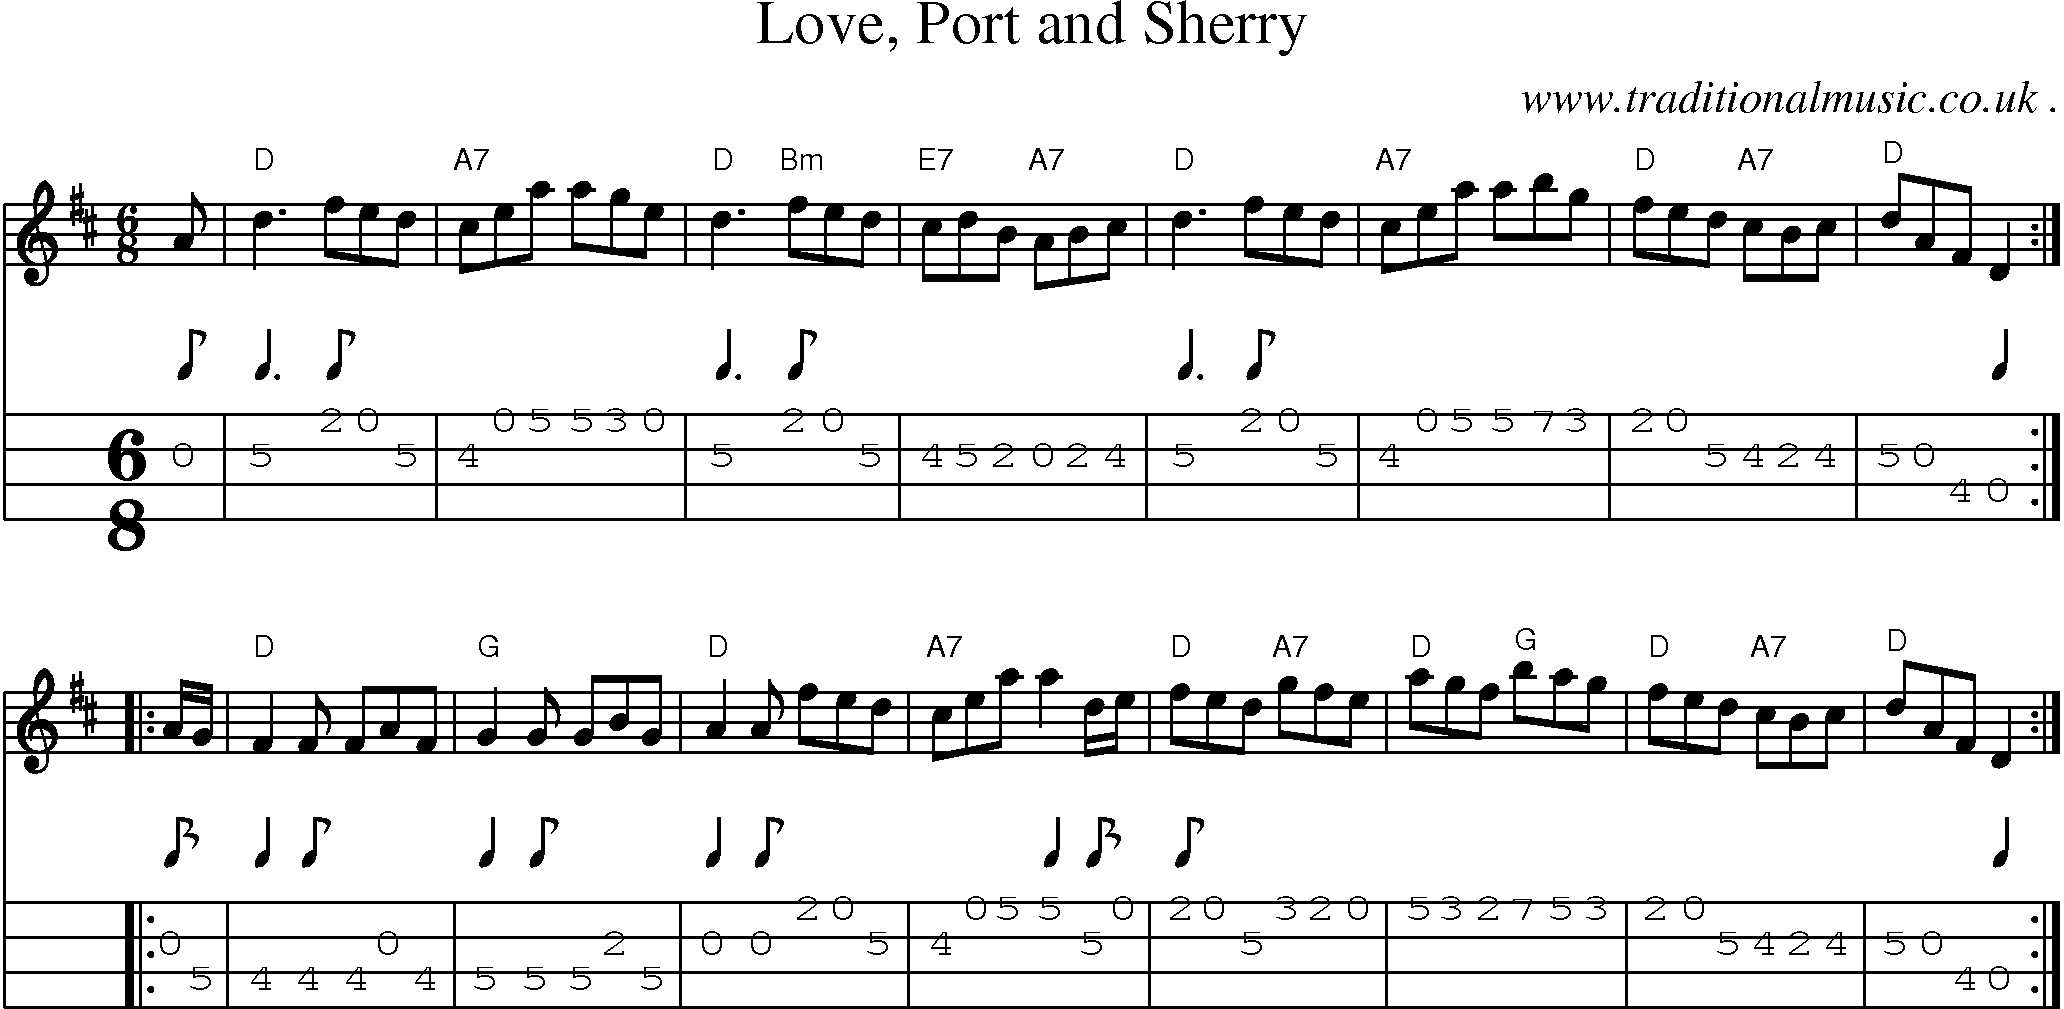 Sheet-music  score, Chords and Mandolin Tabs for Love Port And Sherry